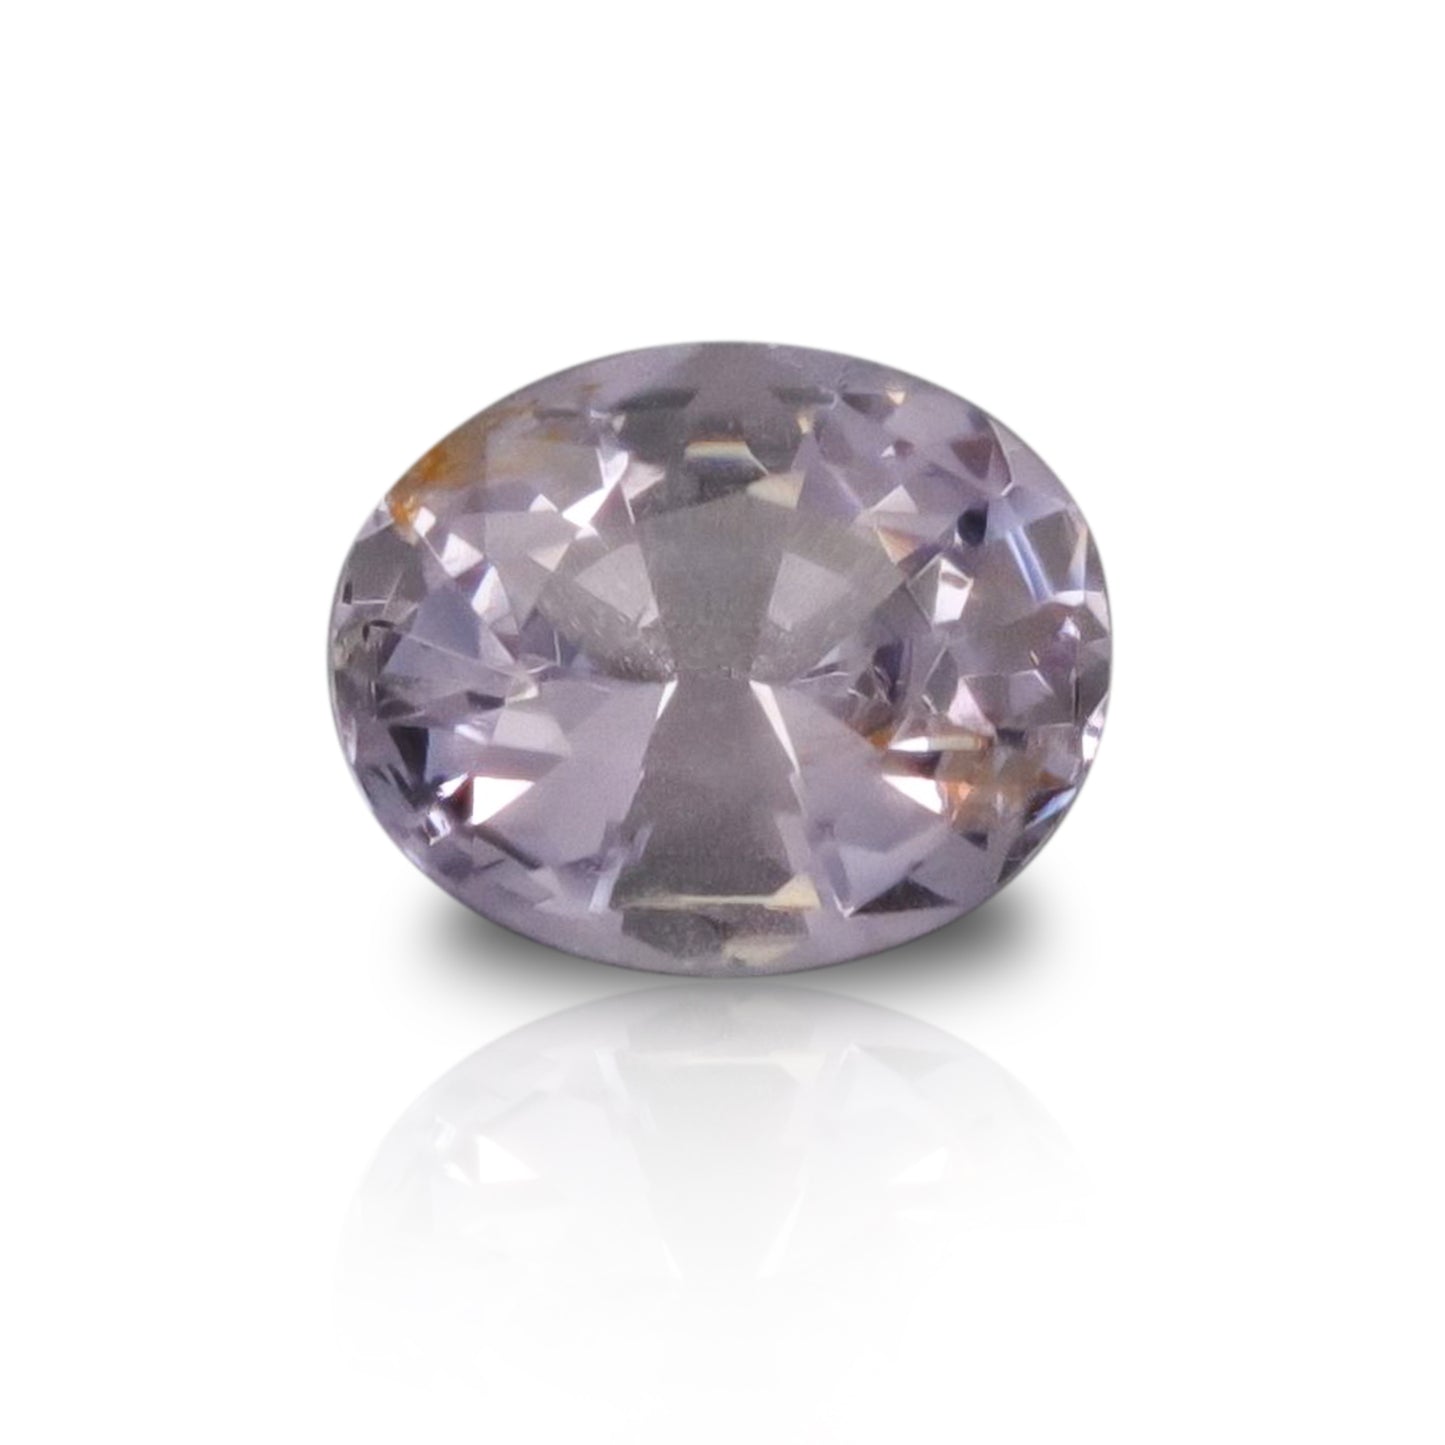 Natural Lilac Spinel 1.33 Carats